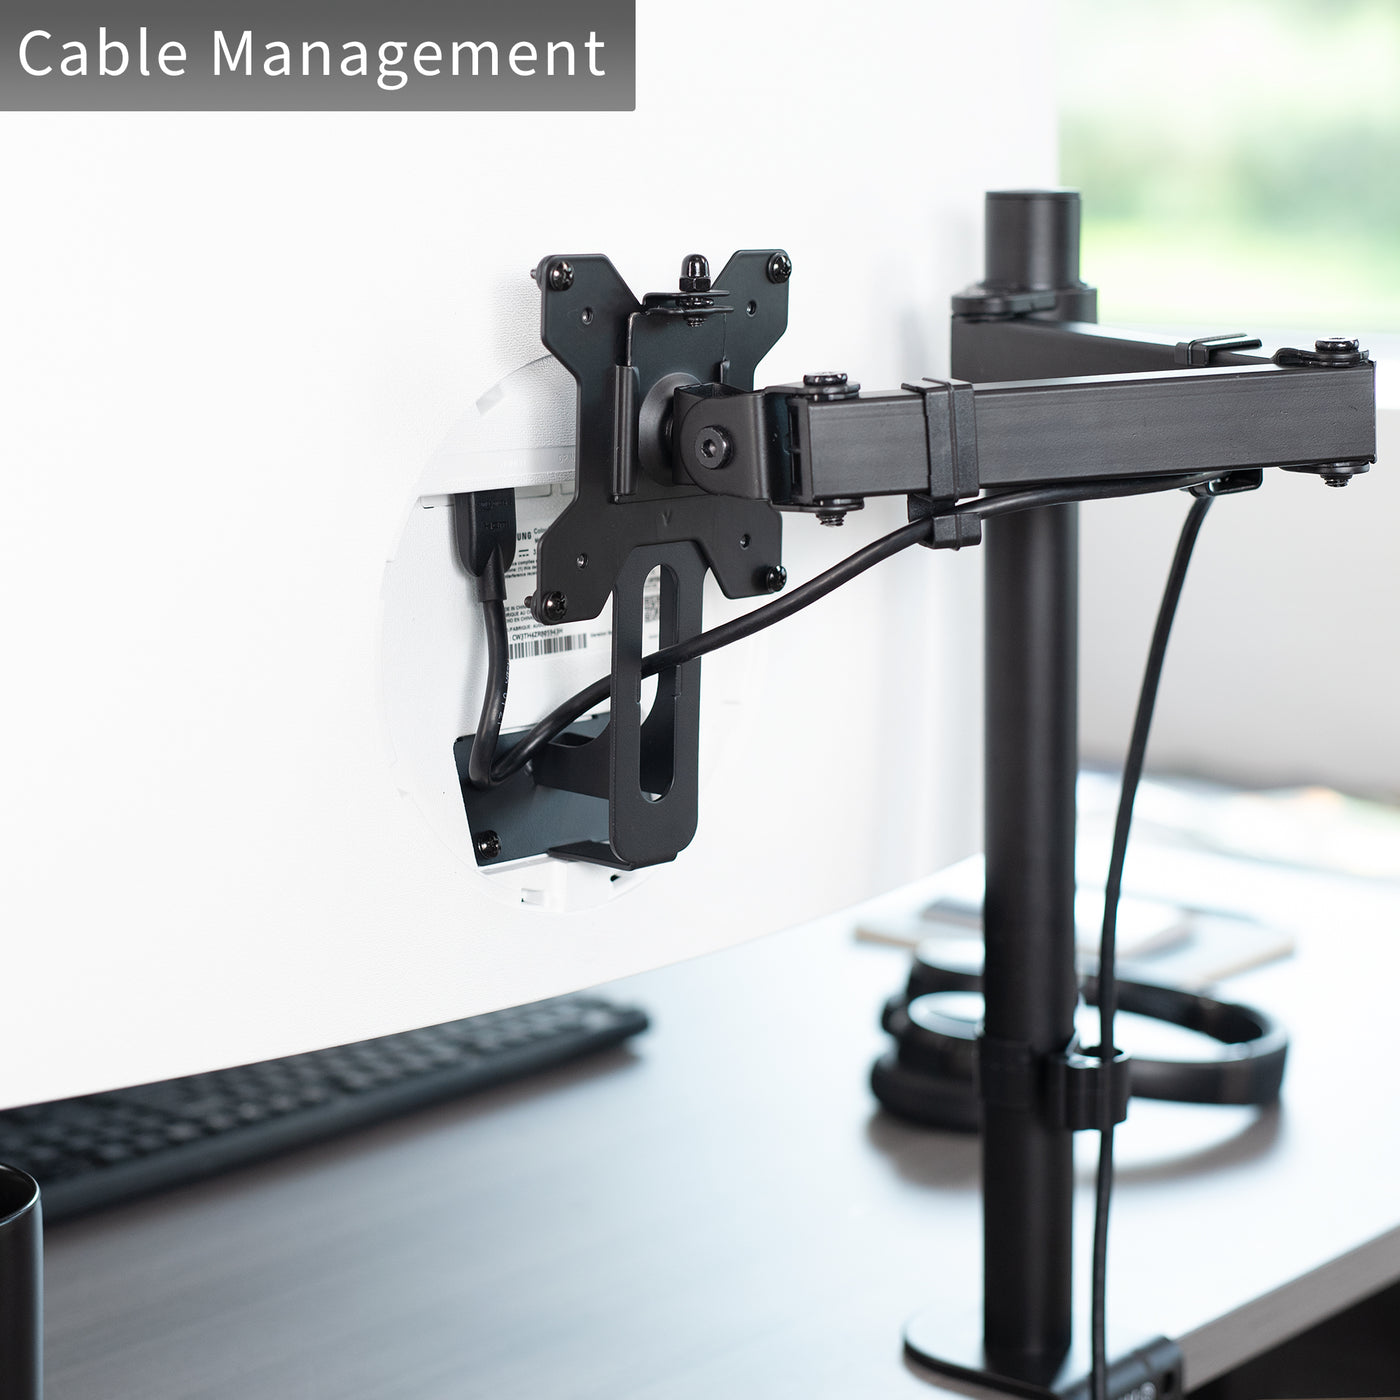 VESA Adapter Designed for the Compatible Samsung UR591C Series allows your non VESA compatible monitor to be mounted to a stand of your choice with an integrated cable management.